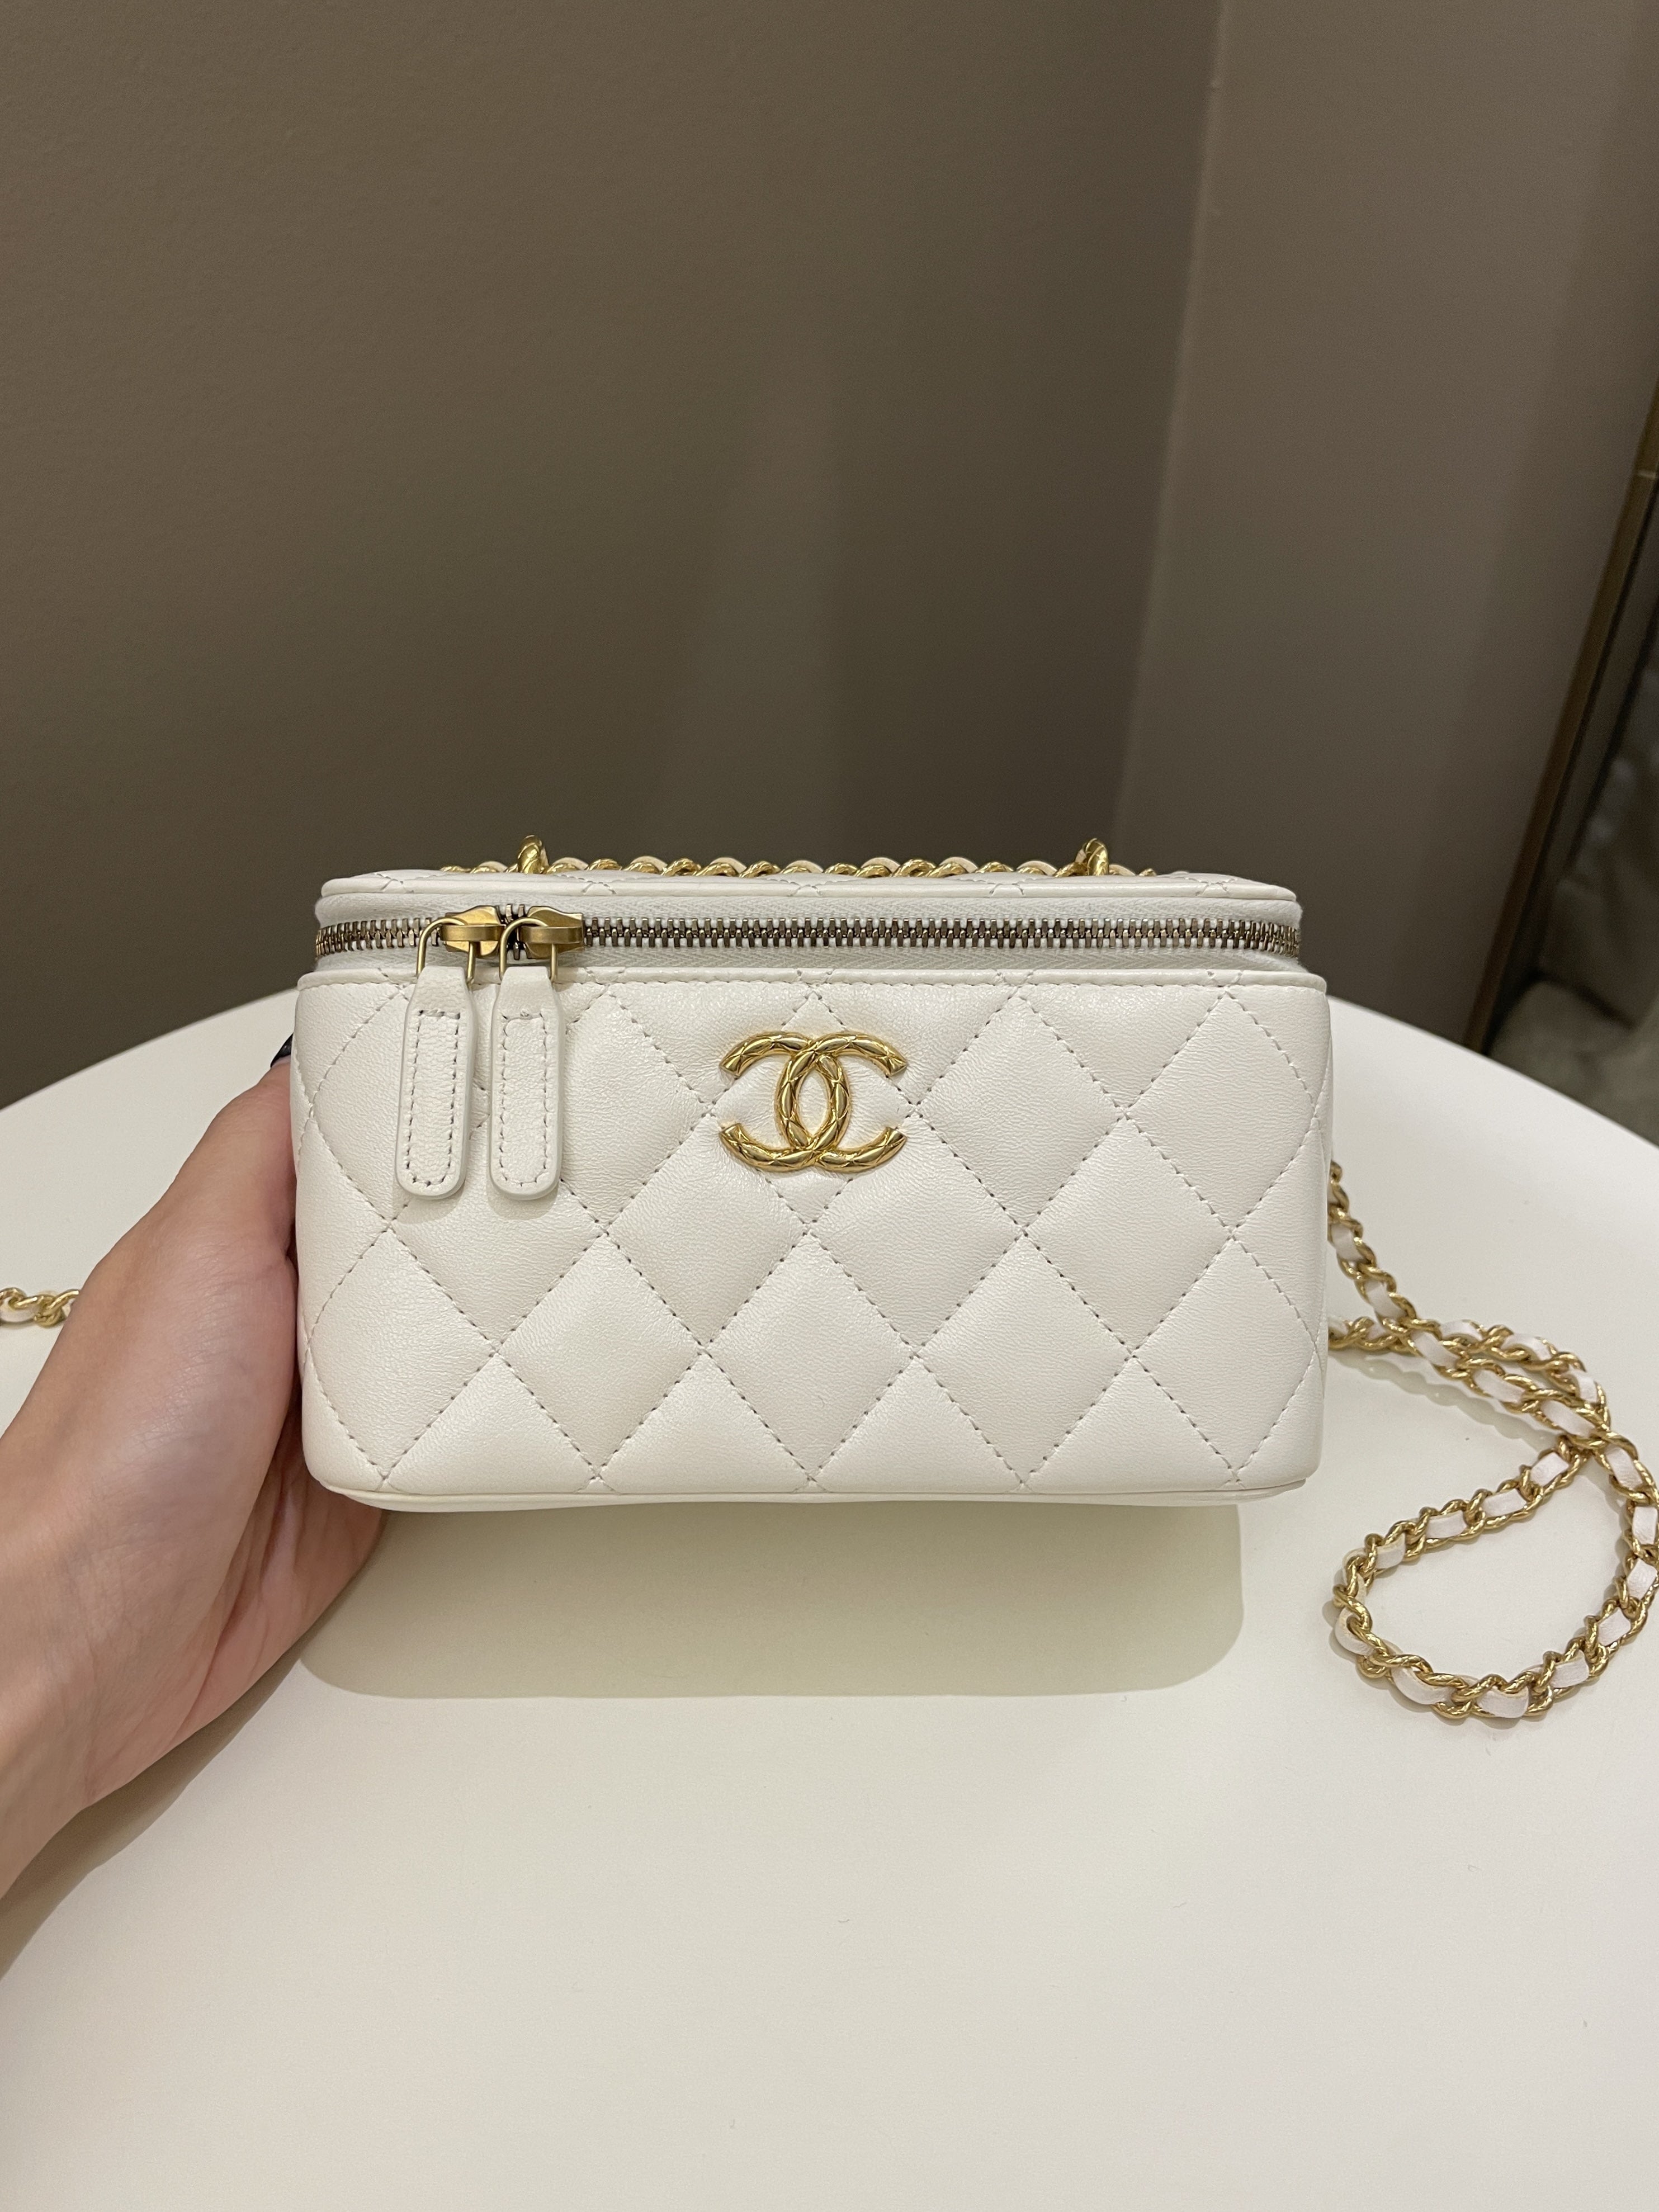 CHANEL 23C BAG COLLECTION WITH PRICE